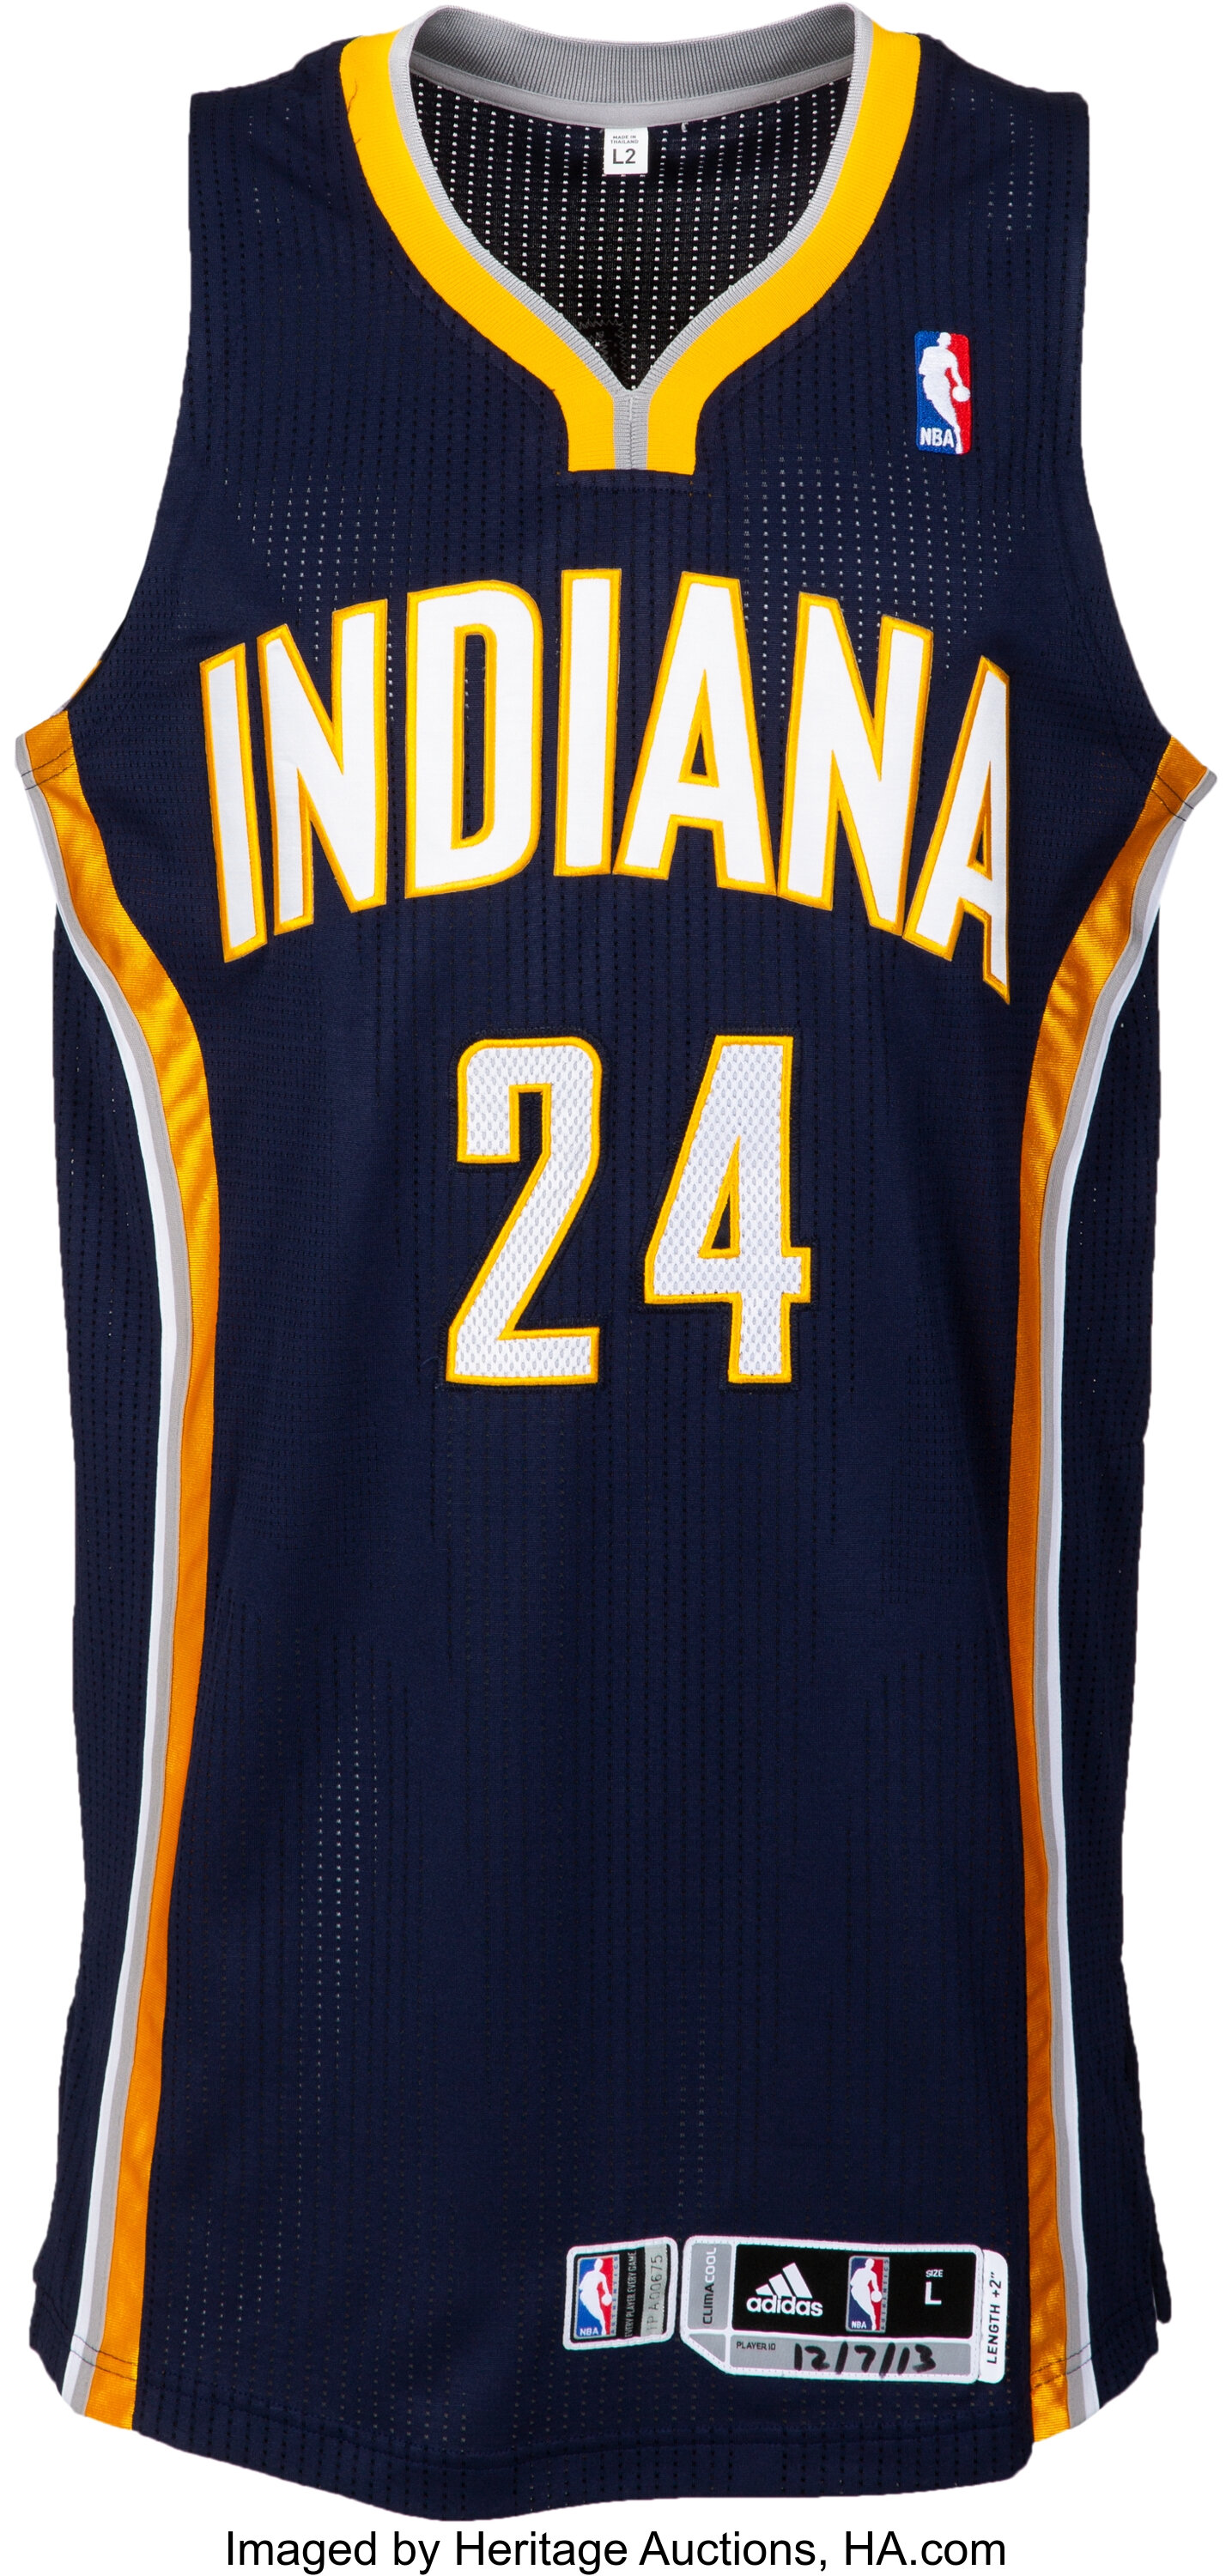 2012-2013 Paul George, Indiana Pacers Gold Alternate Jersey, GI or GW,  Mears LOA